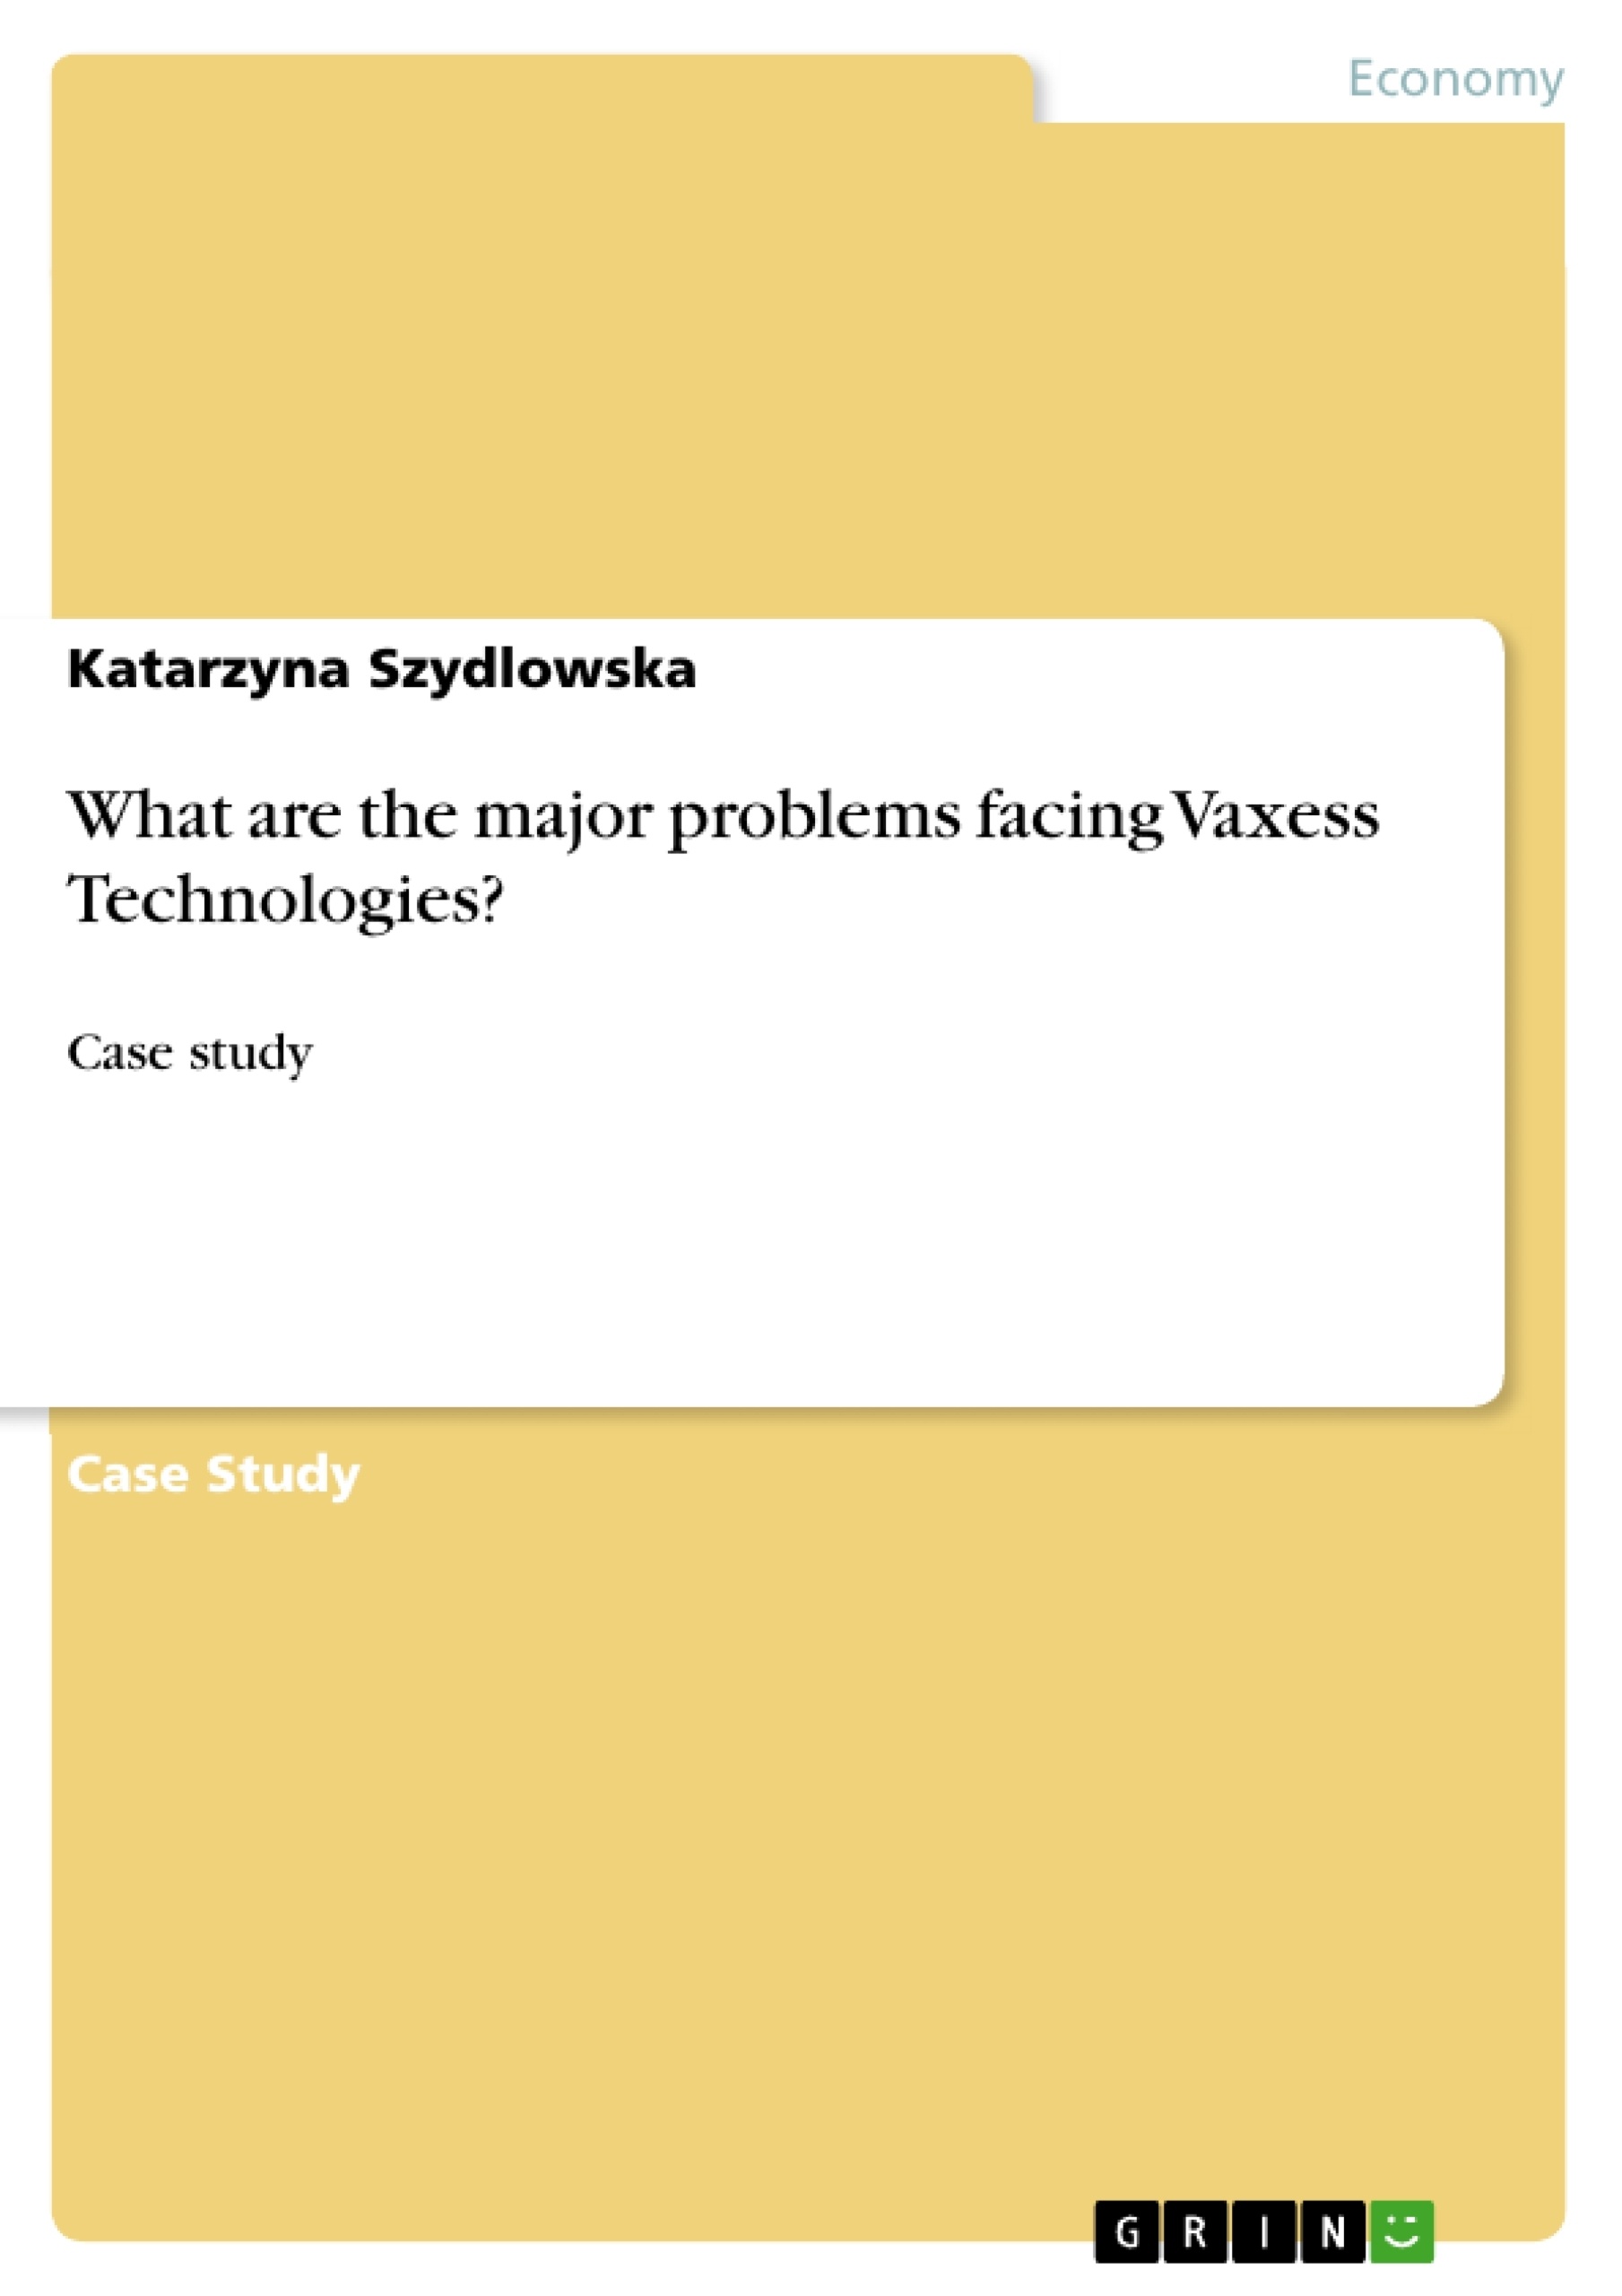 Título: What are the major problems facing Vaxess Technologies?